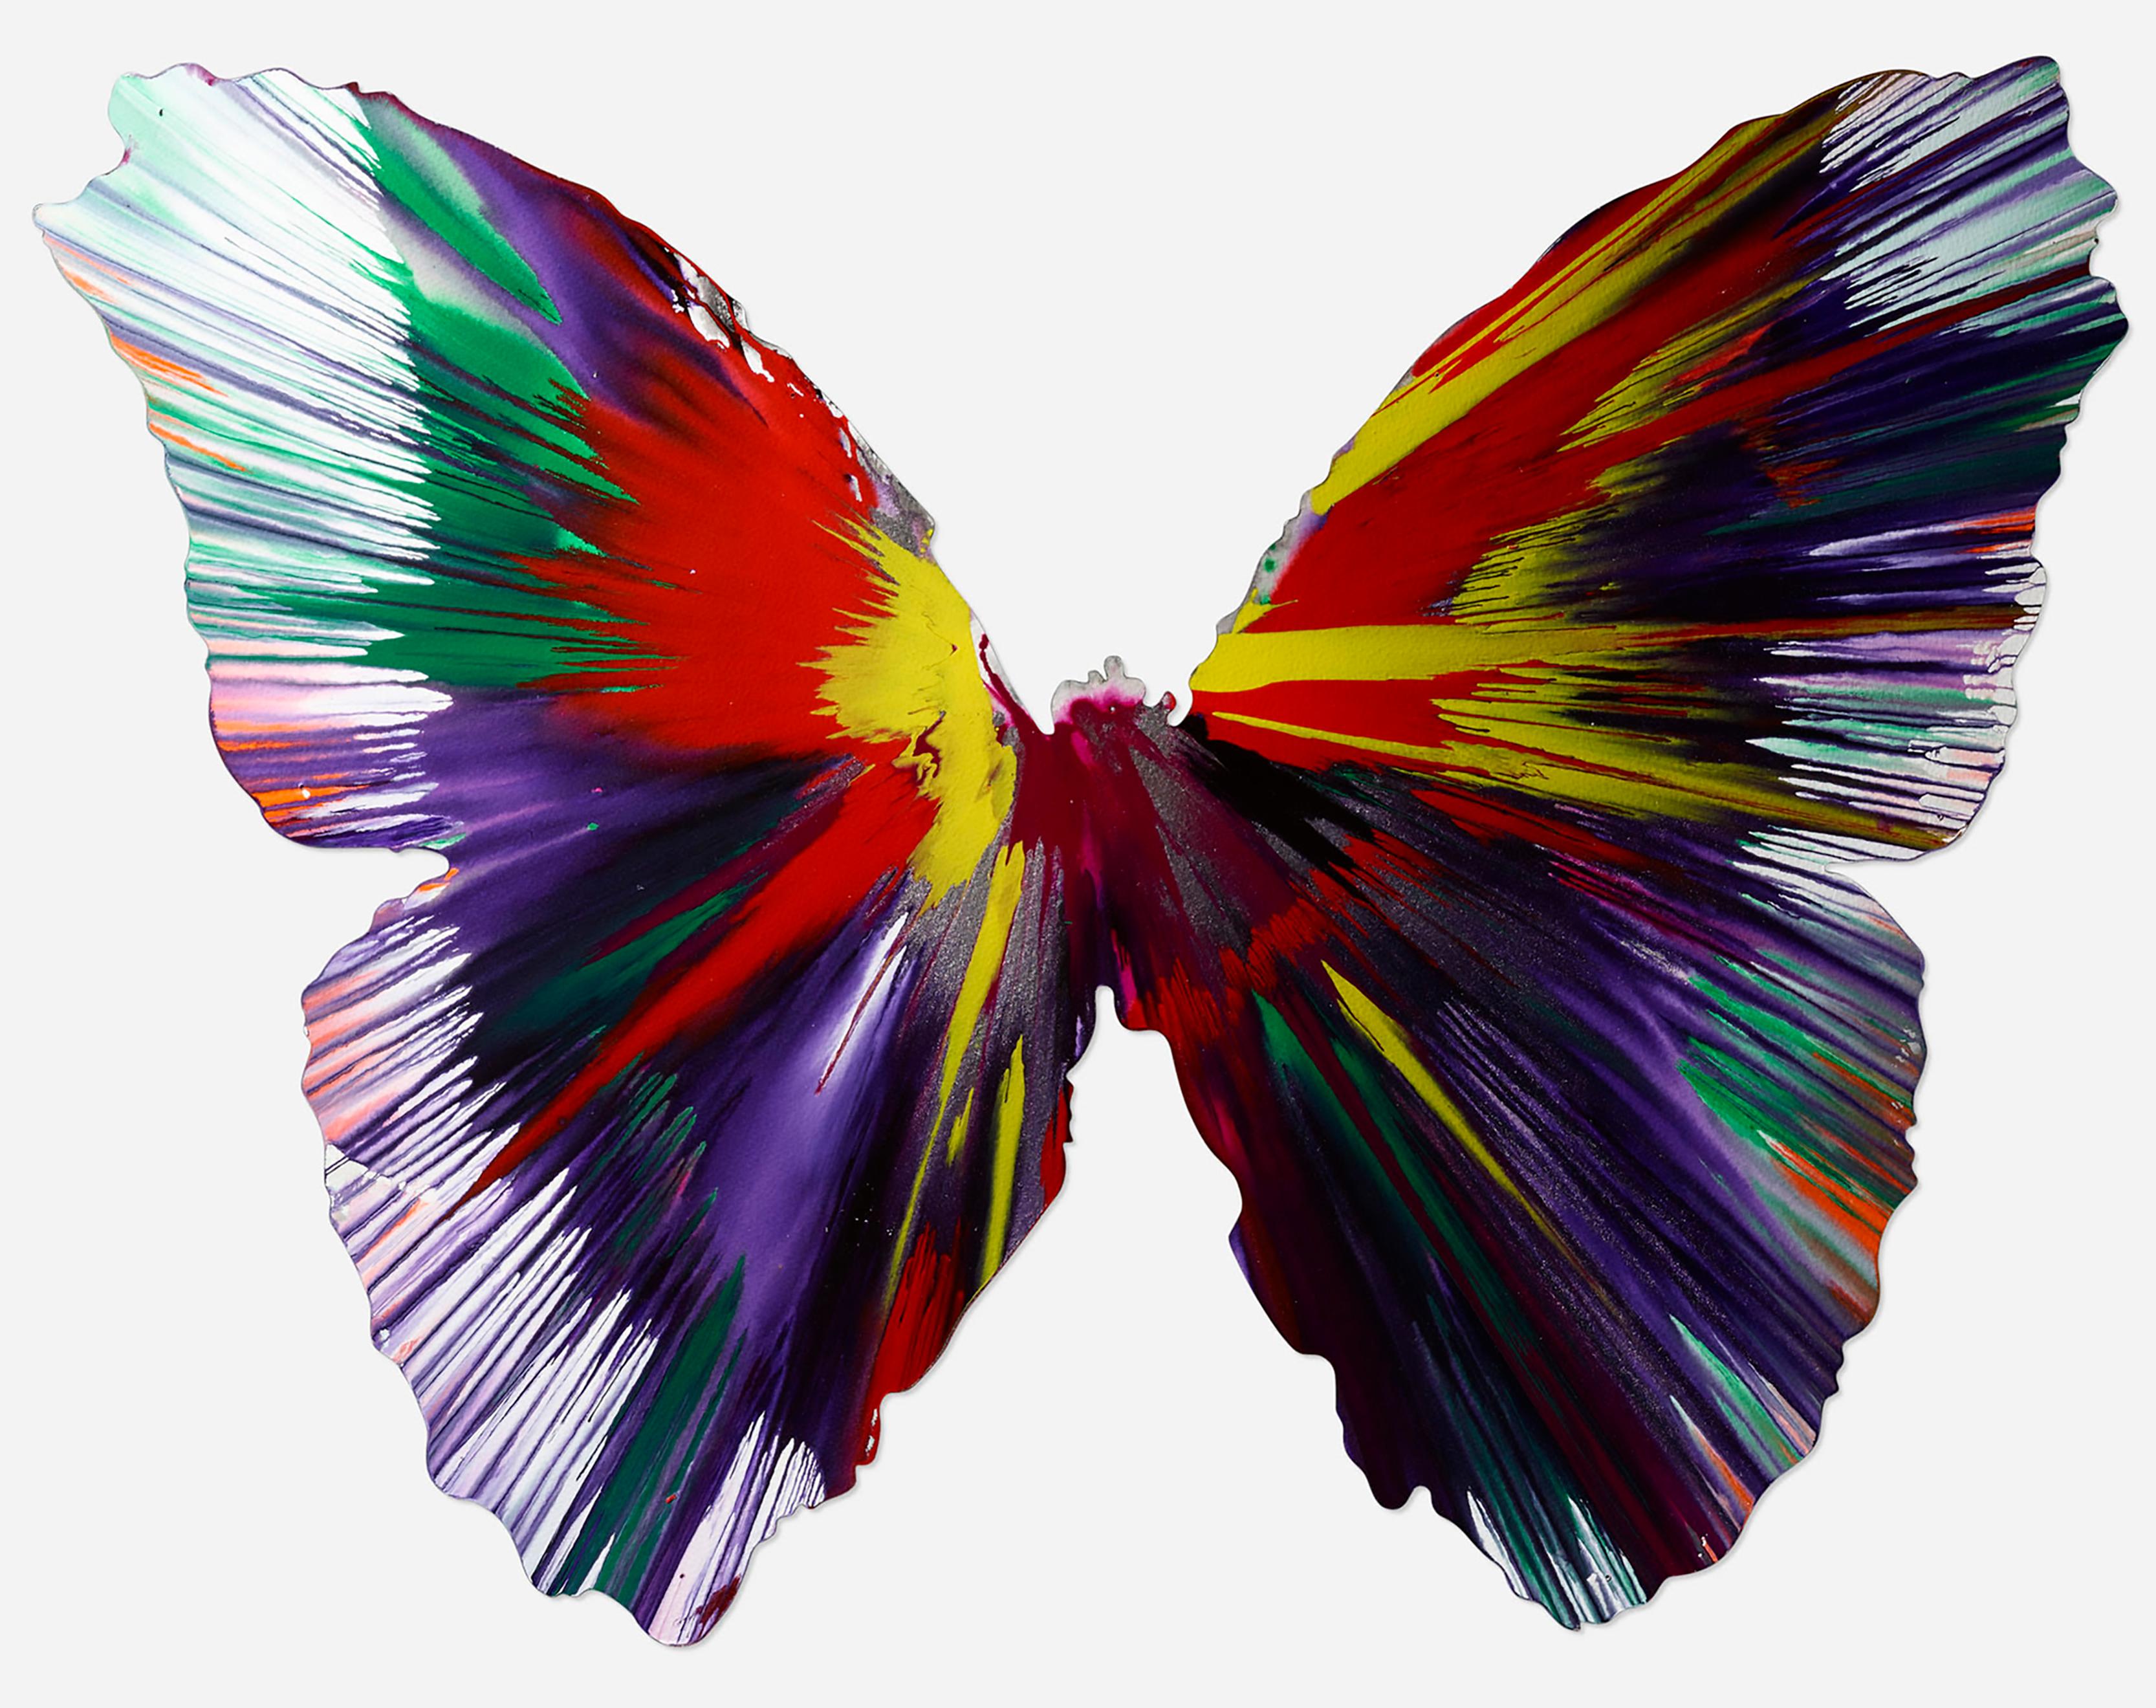 Damien Hirst Spin Painting, 2009 (Damien Hirst Butterfly):
An enthralling Damien Hirst Spin painting with explosions of vivid color amidst the timeless beauty, shape & movement of a Hirst butterfly. This Damien Hirst Spin painting originates from